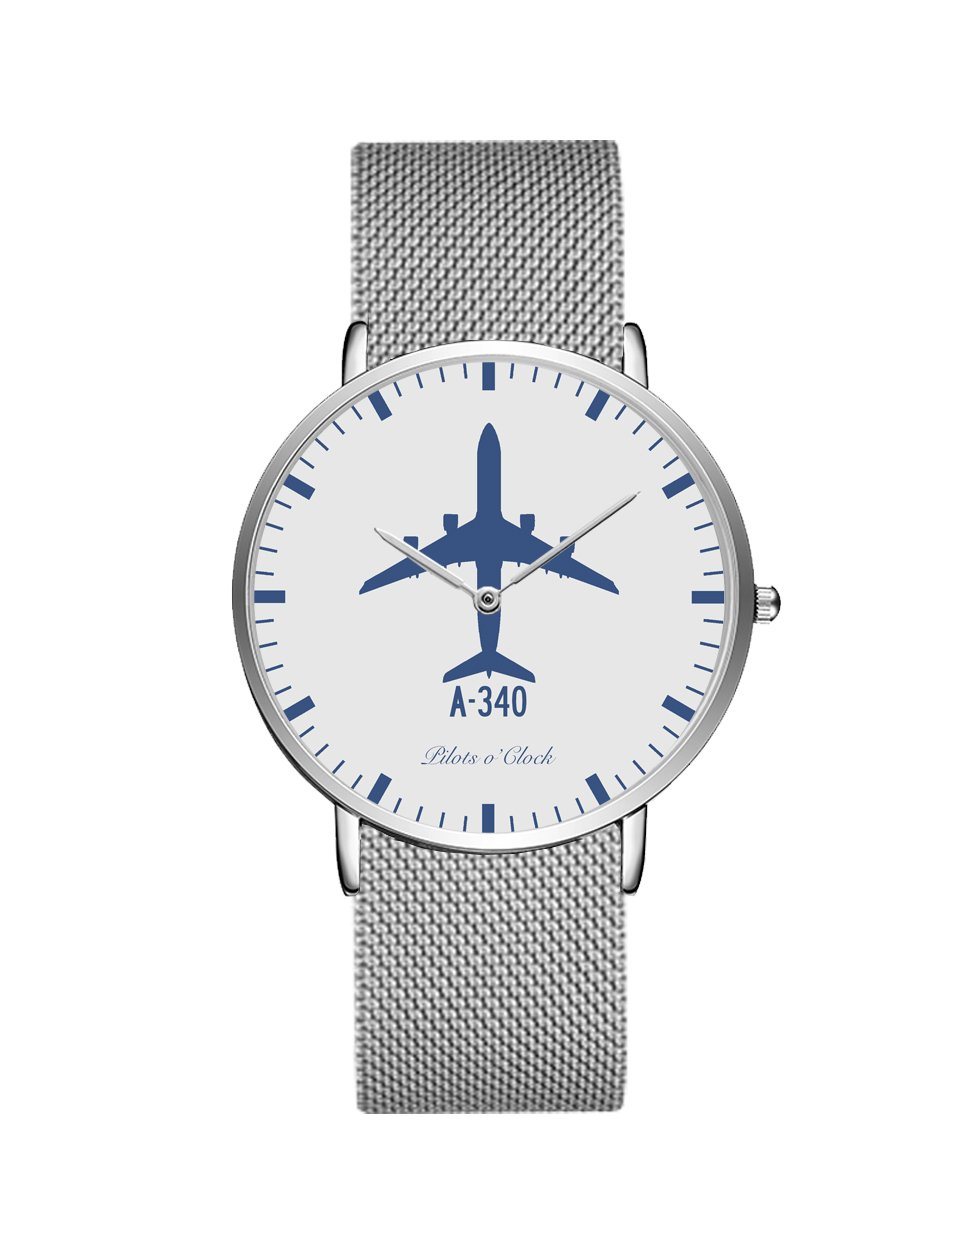 Airbus A340 Stainless Steel Strap Watches Pilot Eyes Store Silver & Silver Stainless Steel Strap 